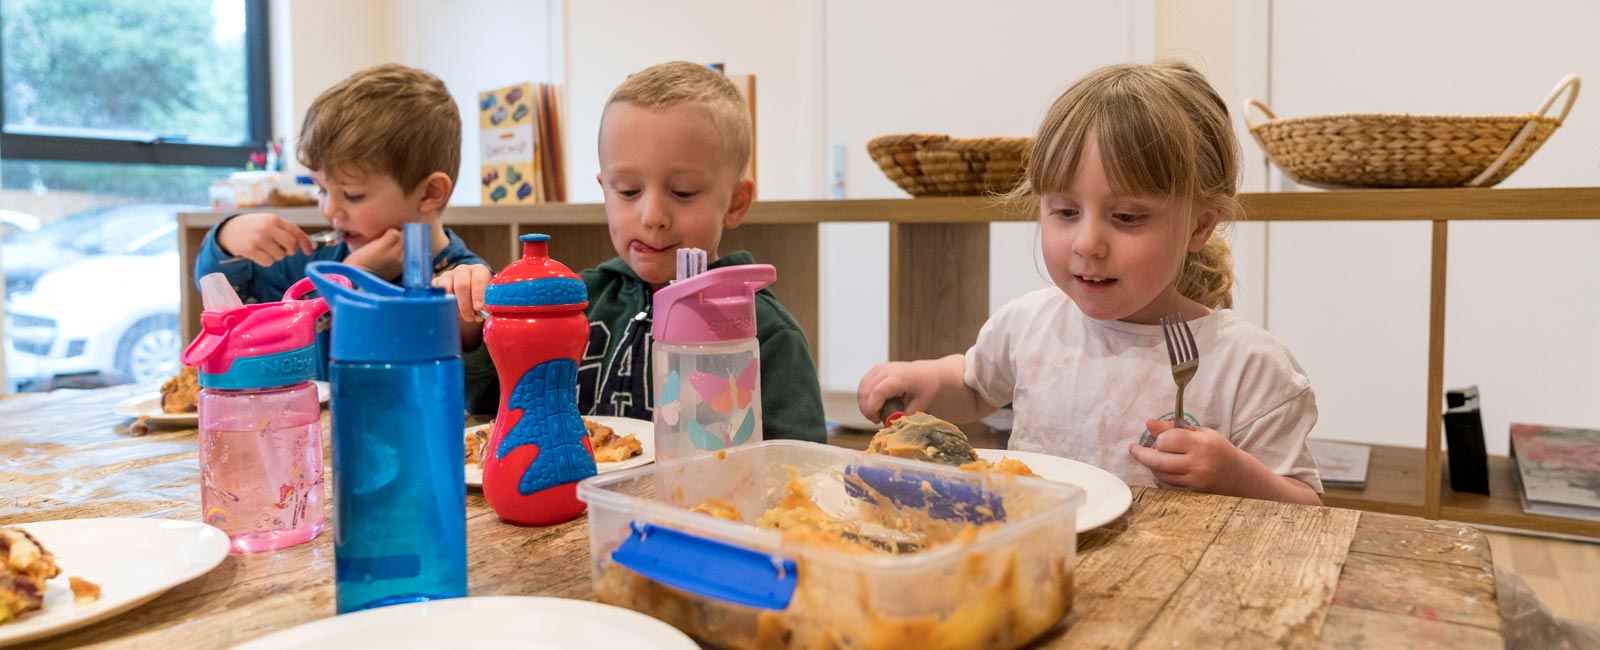 Only the freshest, most nutritious ingredients are used in our freshly-prepared children's meals.